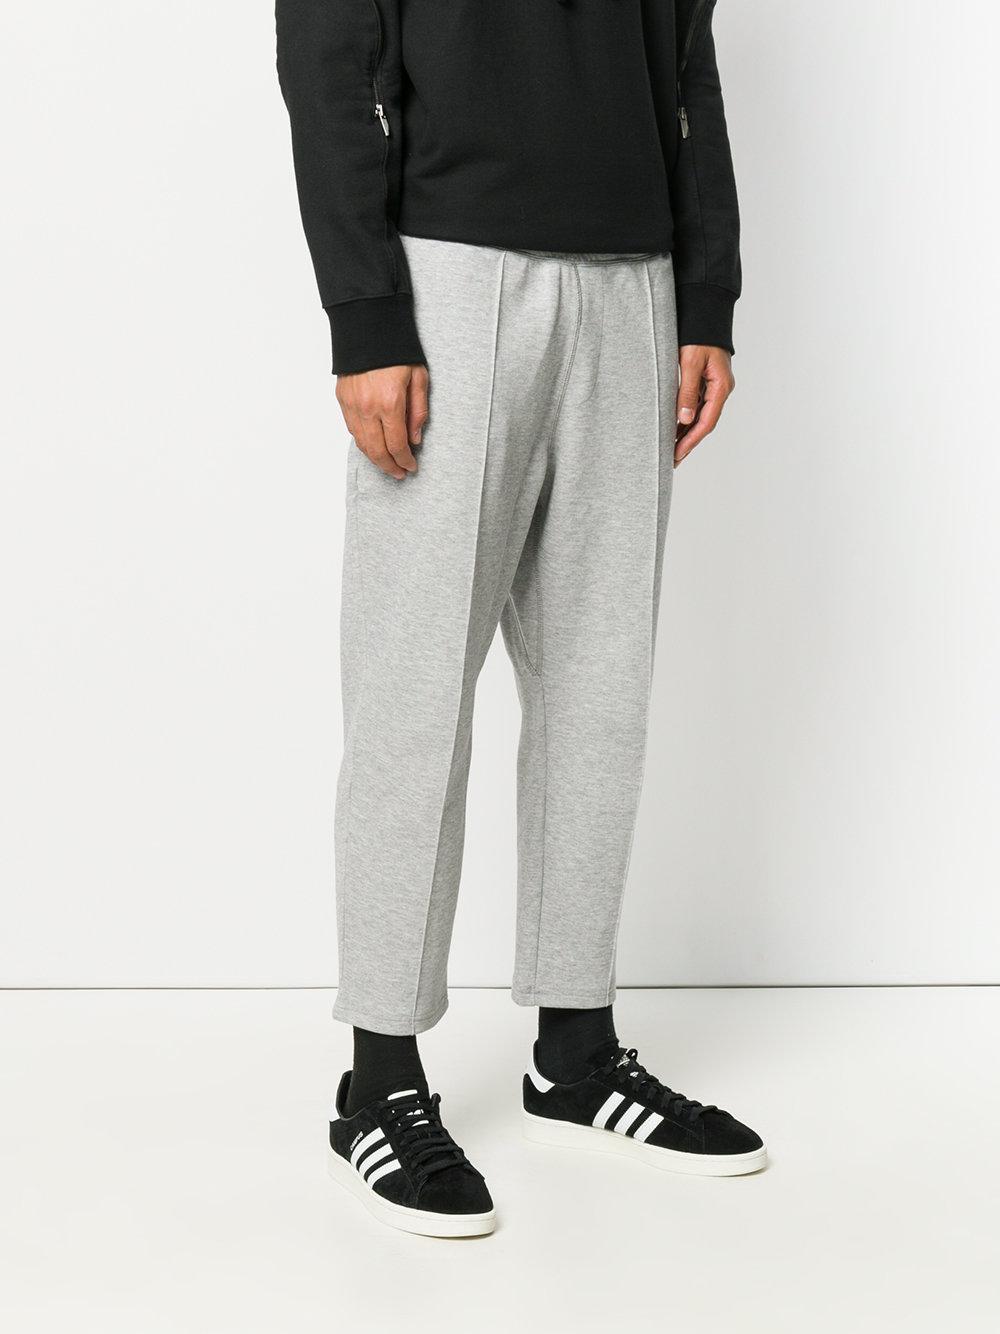 adidas Originals Cotton Instinct Cropped Pintuck Joggers in Grey (Gray) for  Men - Lyst